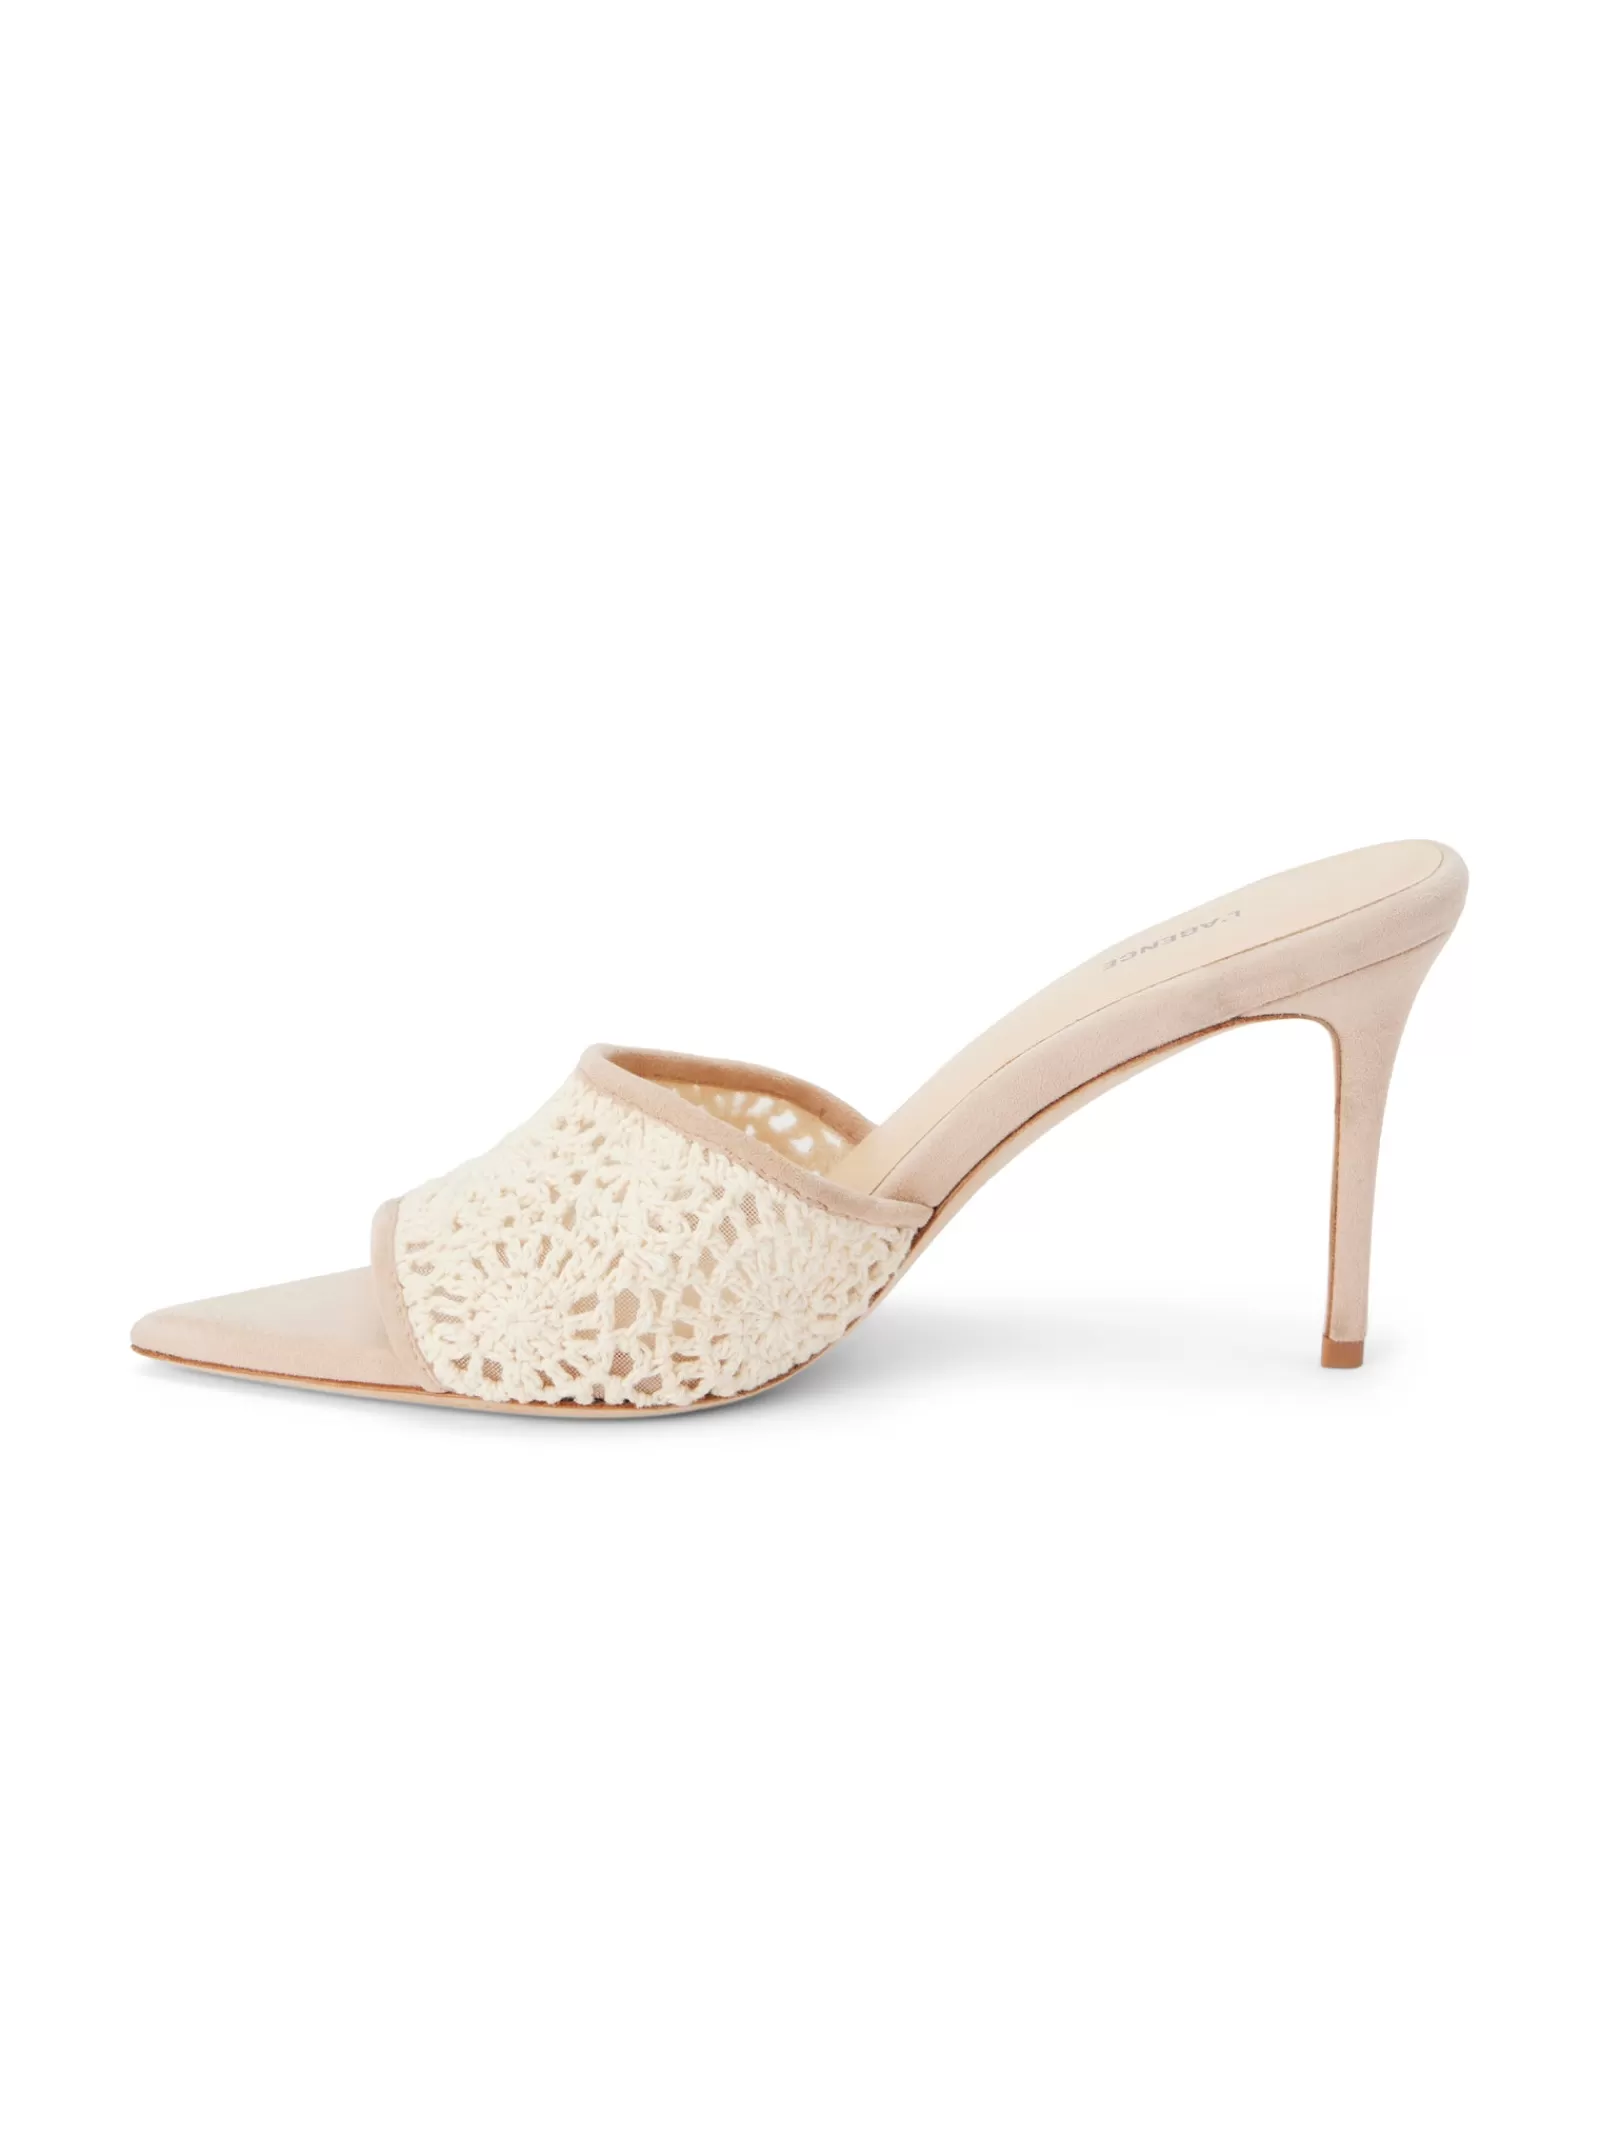 L'AGENCE Armande Crochet Mule< Spring Collection | Mules